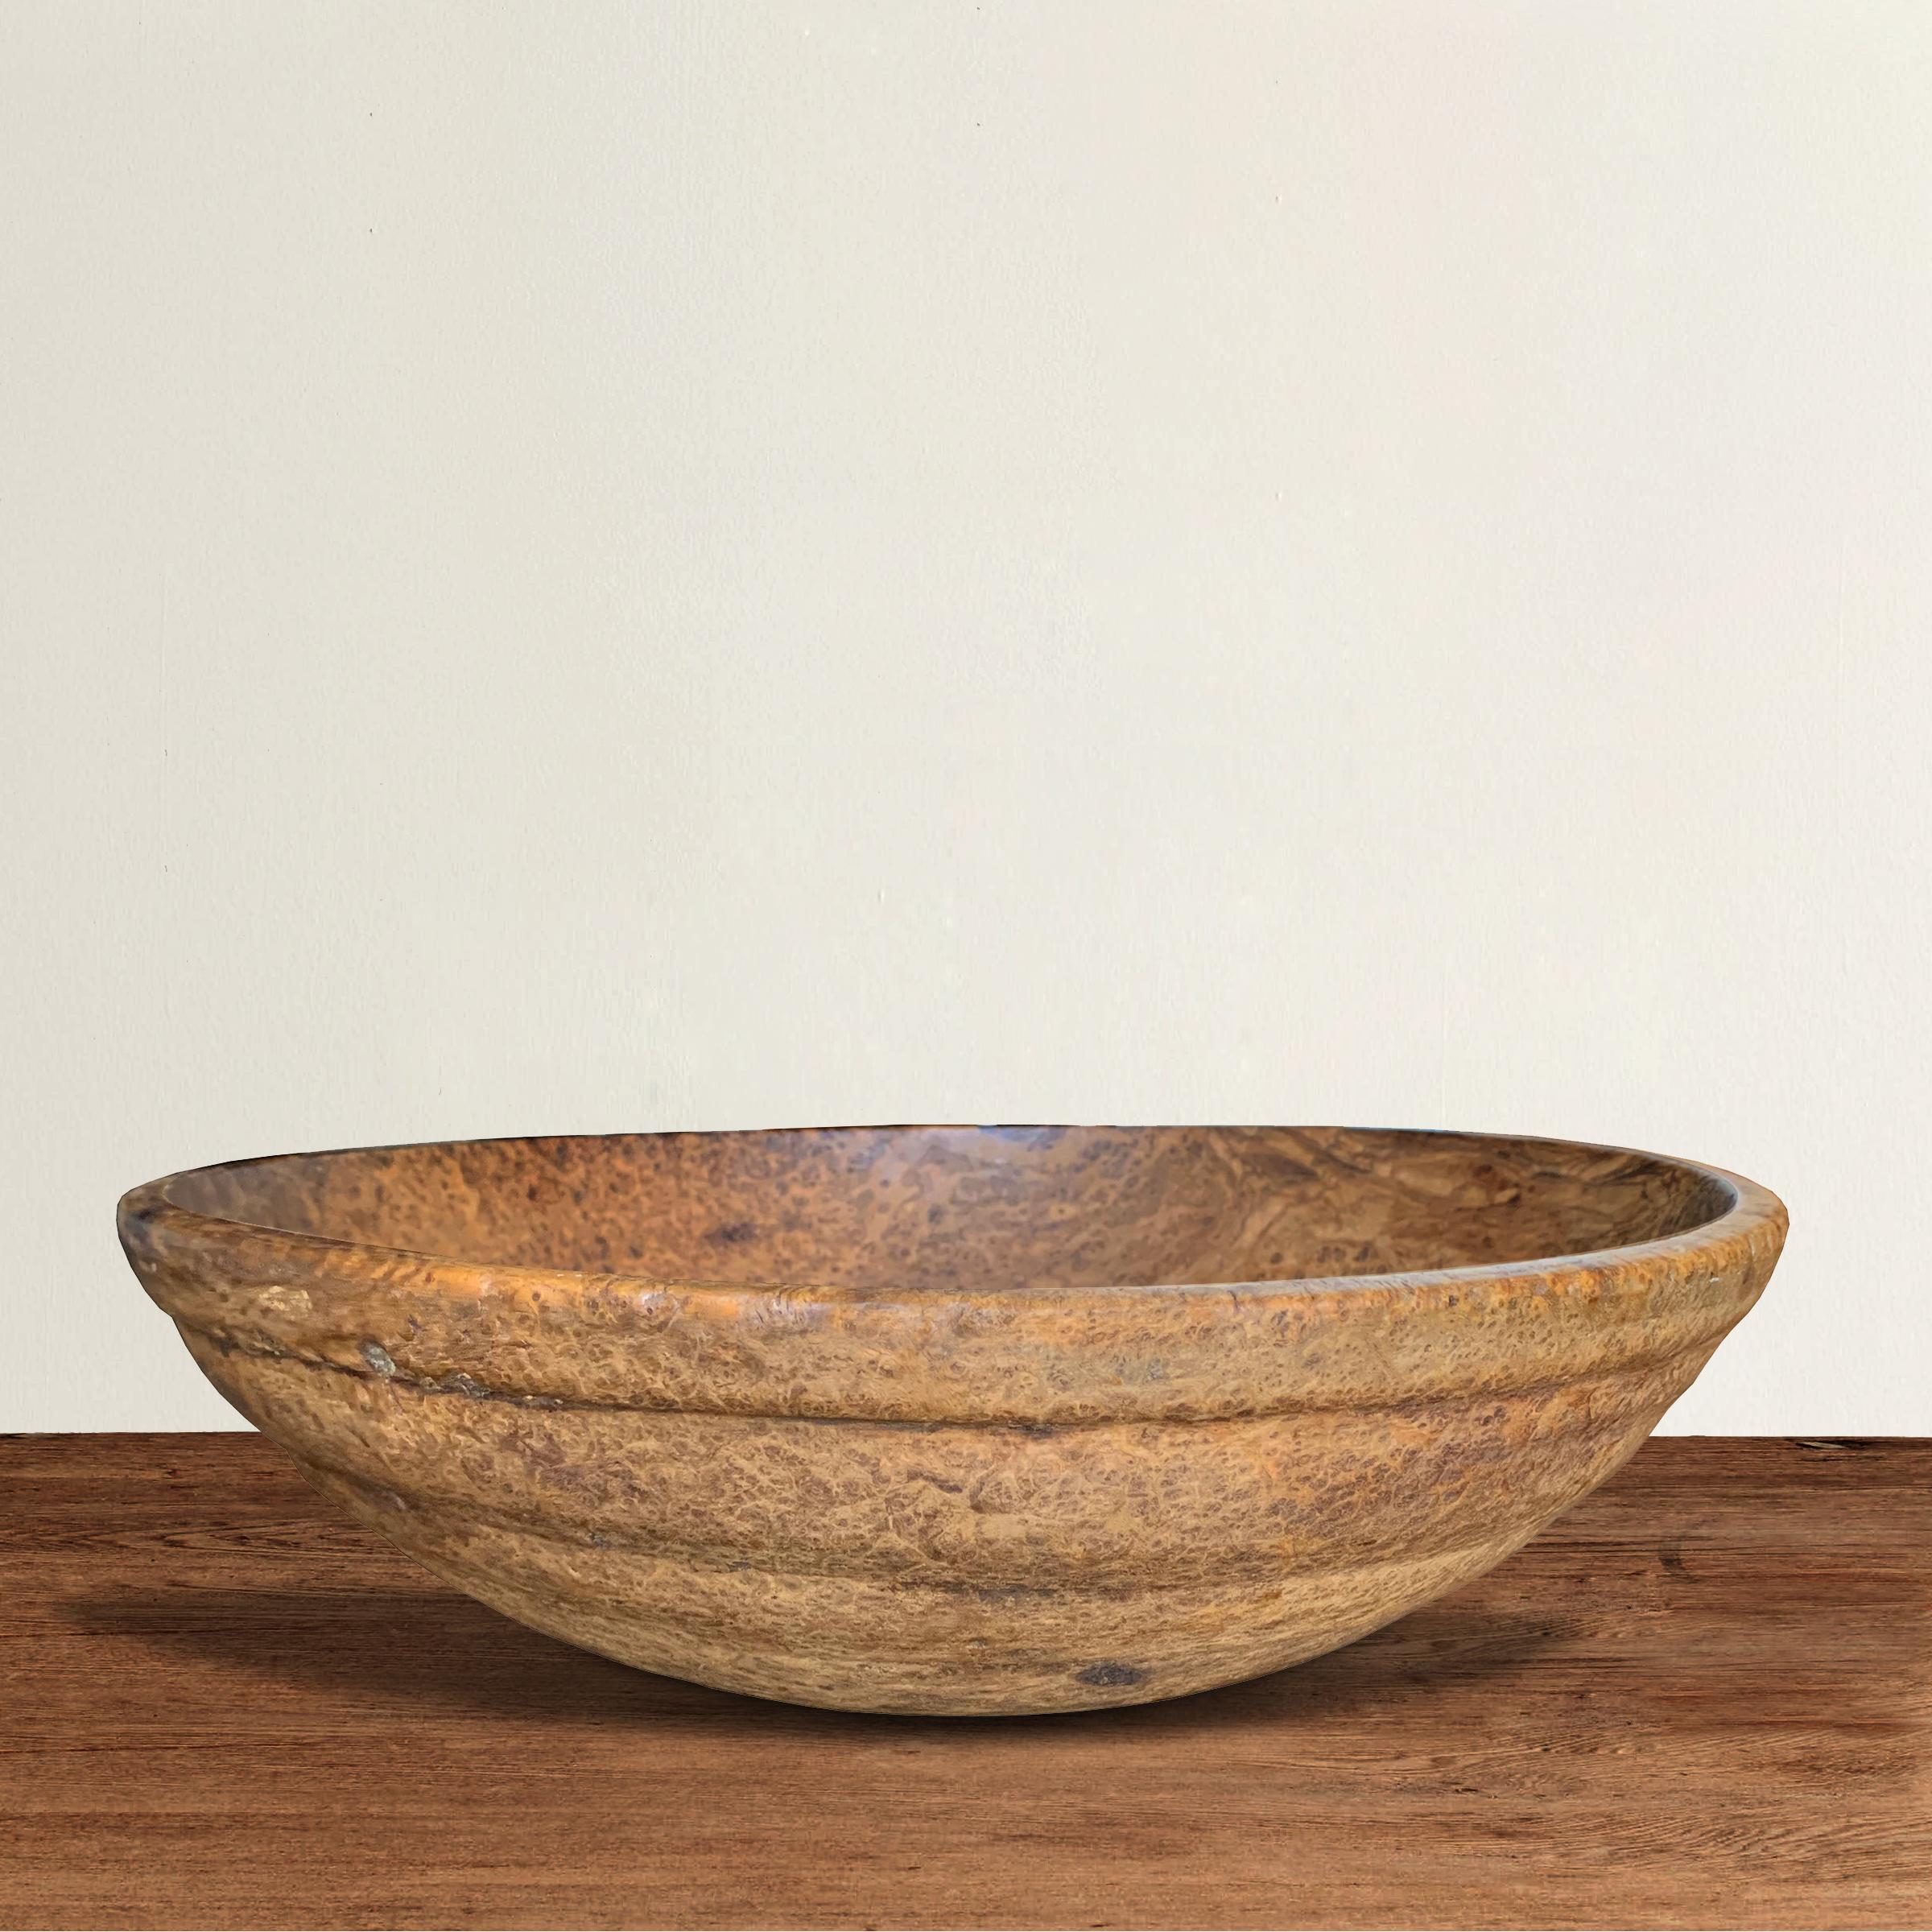 An incredible 18th century early American ash burl bowl from New England, possibly New York, with a heavy lip, spiral-cut ribbed sides, and an unbelievable surface texture and well-worn patina, the result of over two centuries of use.